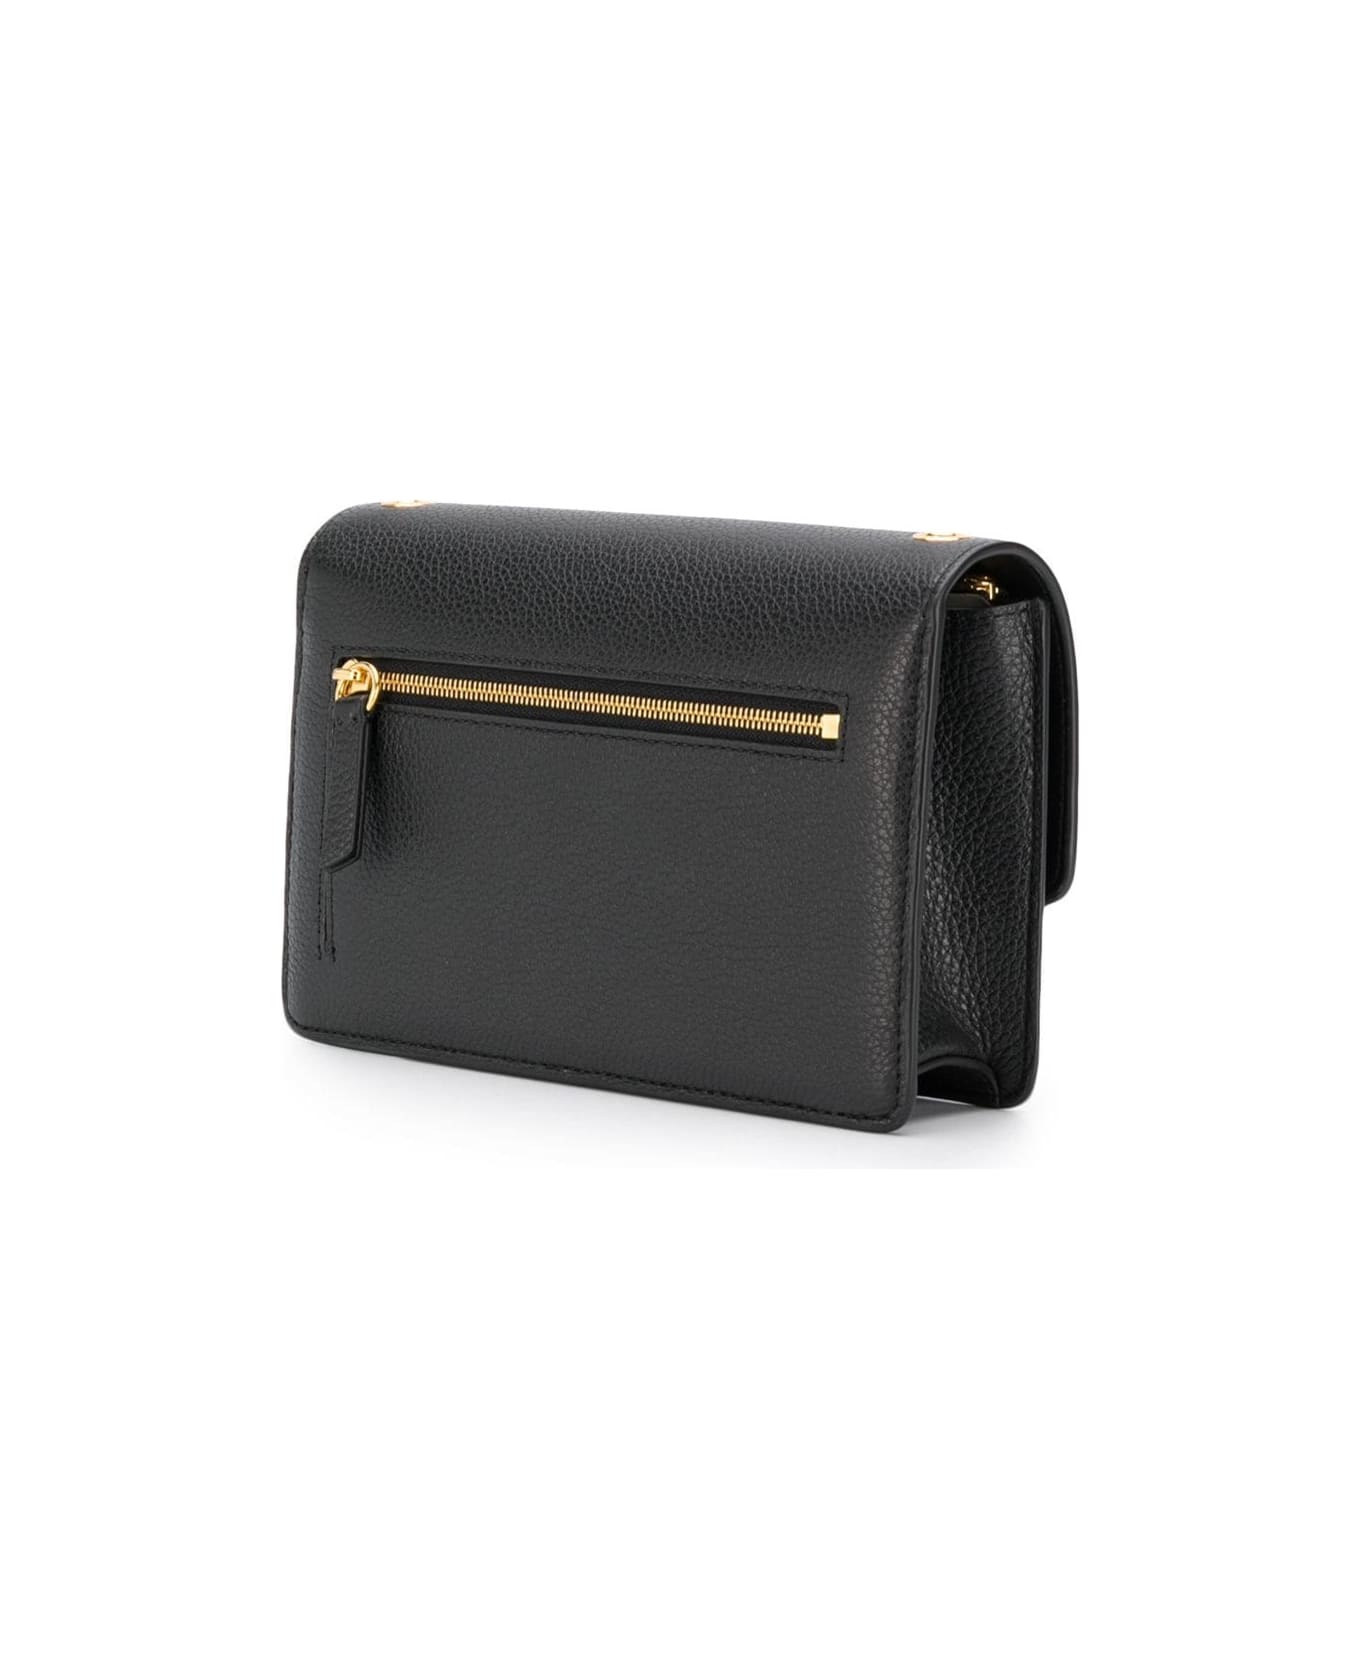 Mulberry 'small Darley' Black Shoulder Bag With Twist Closure In Grainy Leather Woman - Black